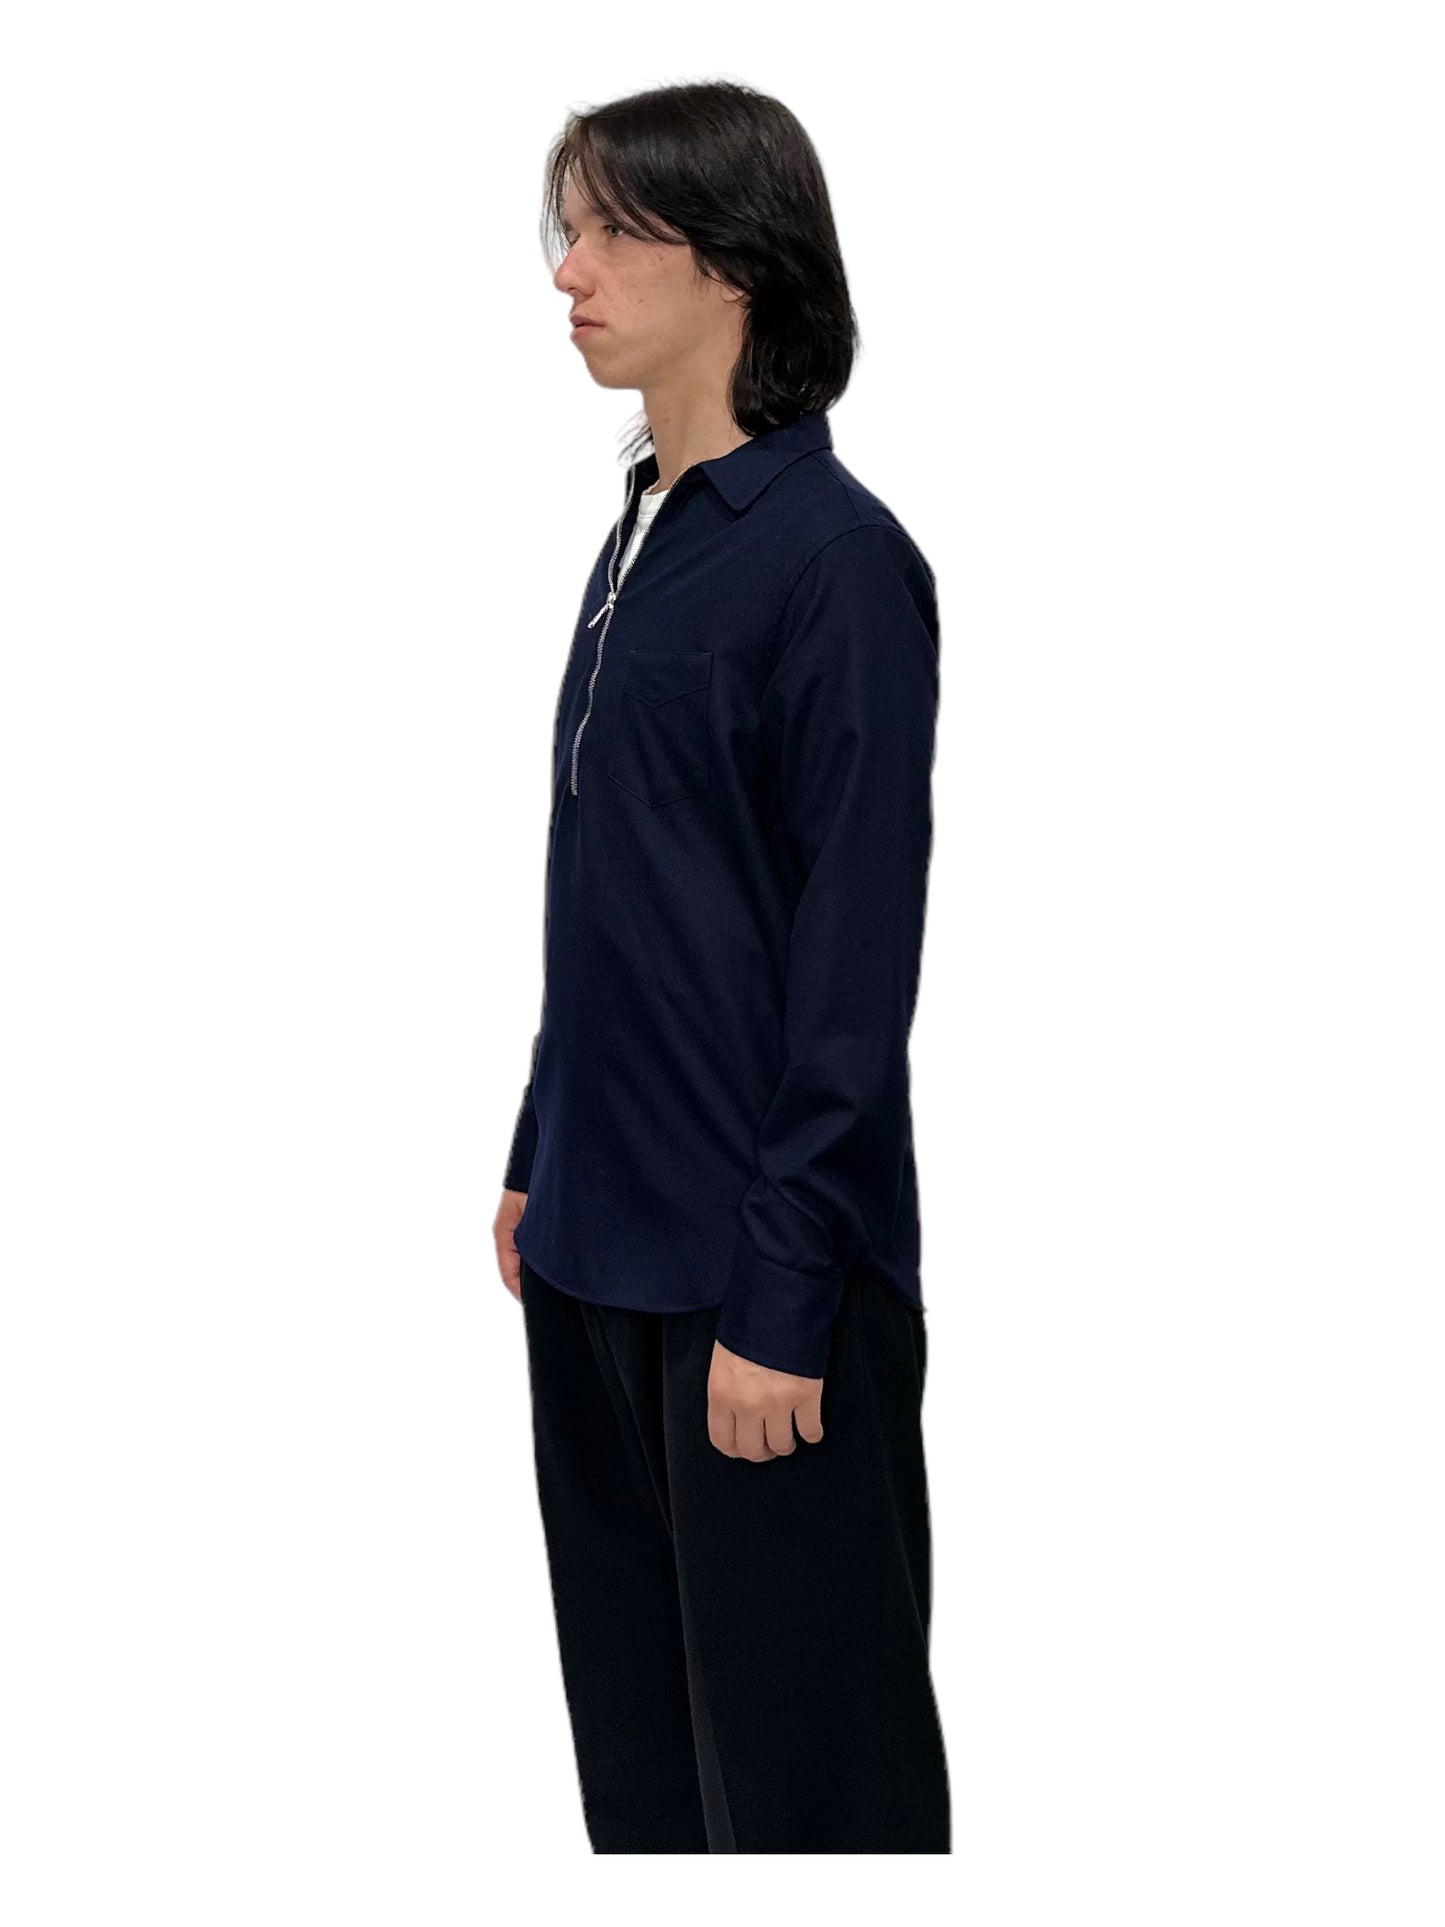 Officine Générale Navy Blue 1/2 Zip Long Sleeve Shirt - Genuine Design Luxury Consignment for Men. New & Pre-Owned Clothing, Shoes, & Accessories. Calgary, Canada